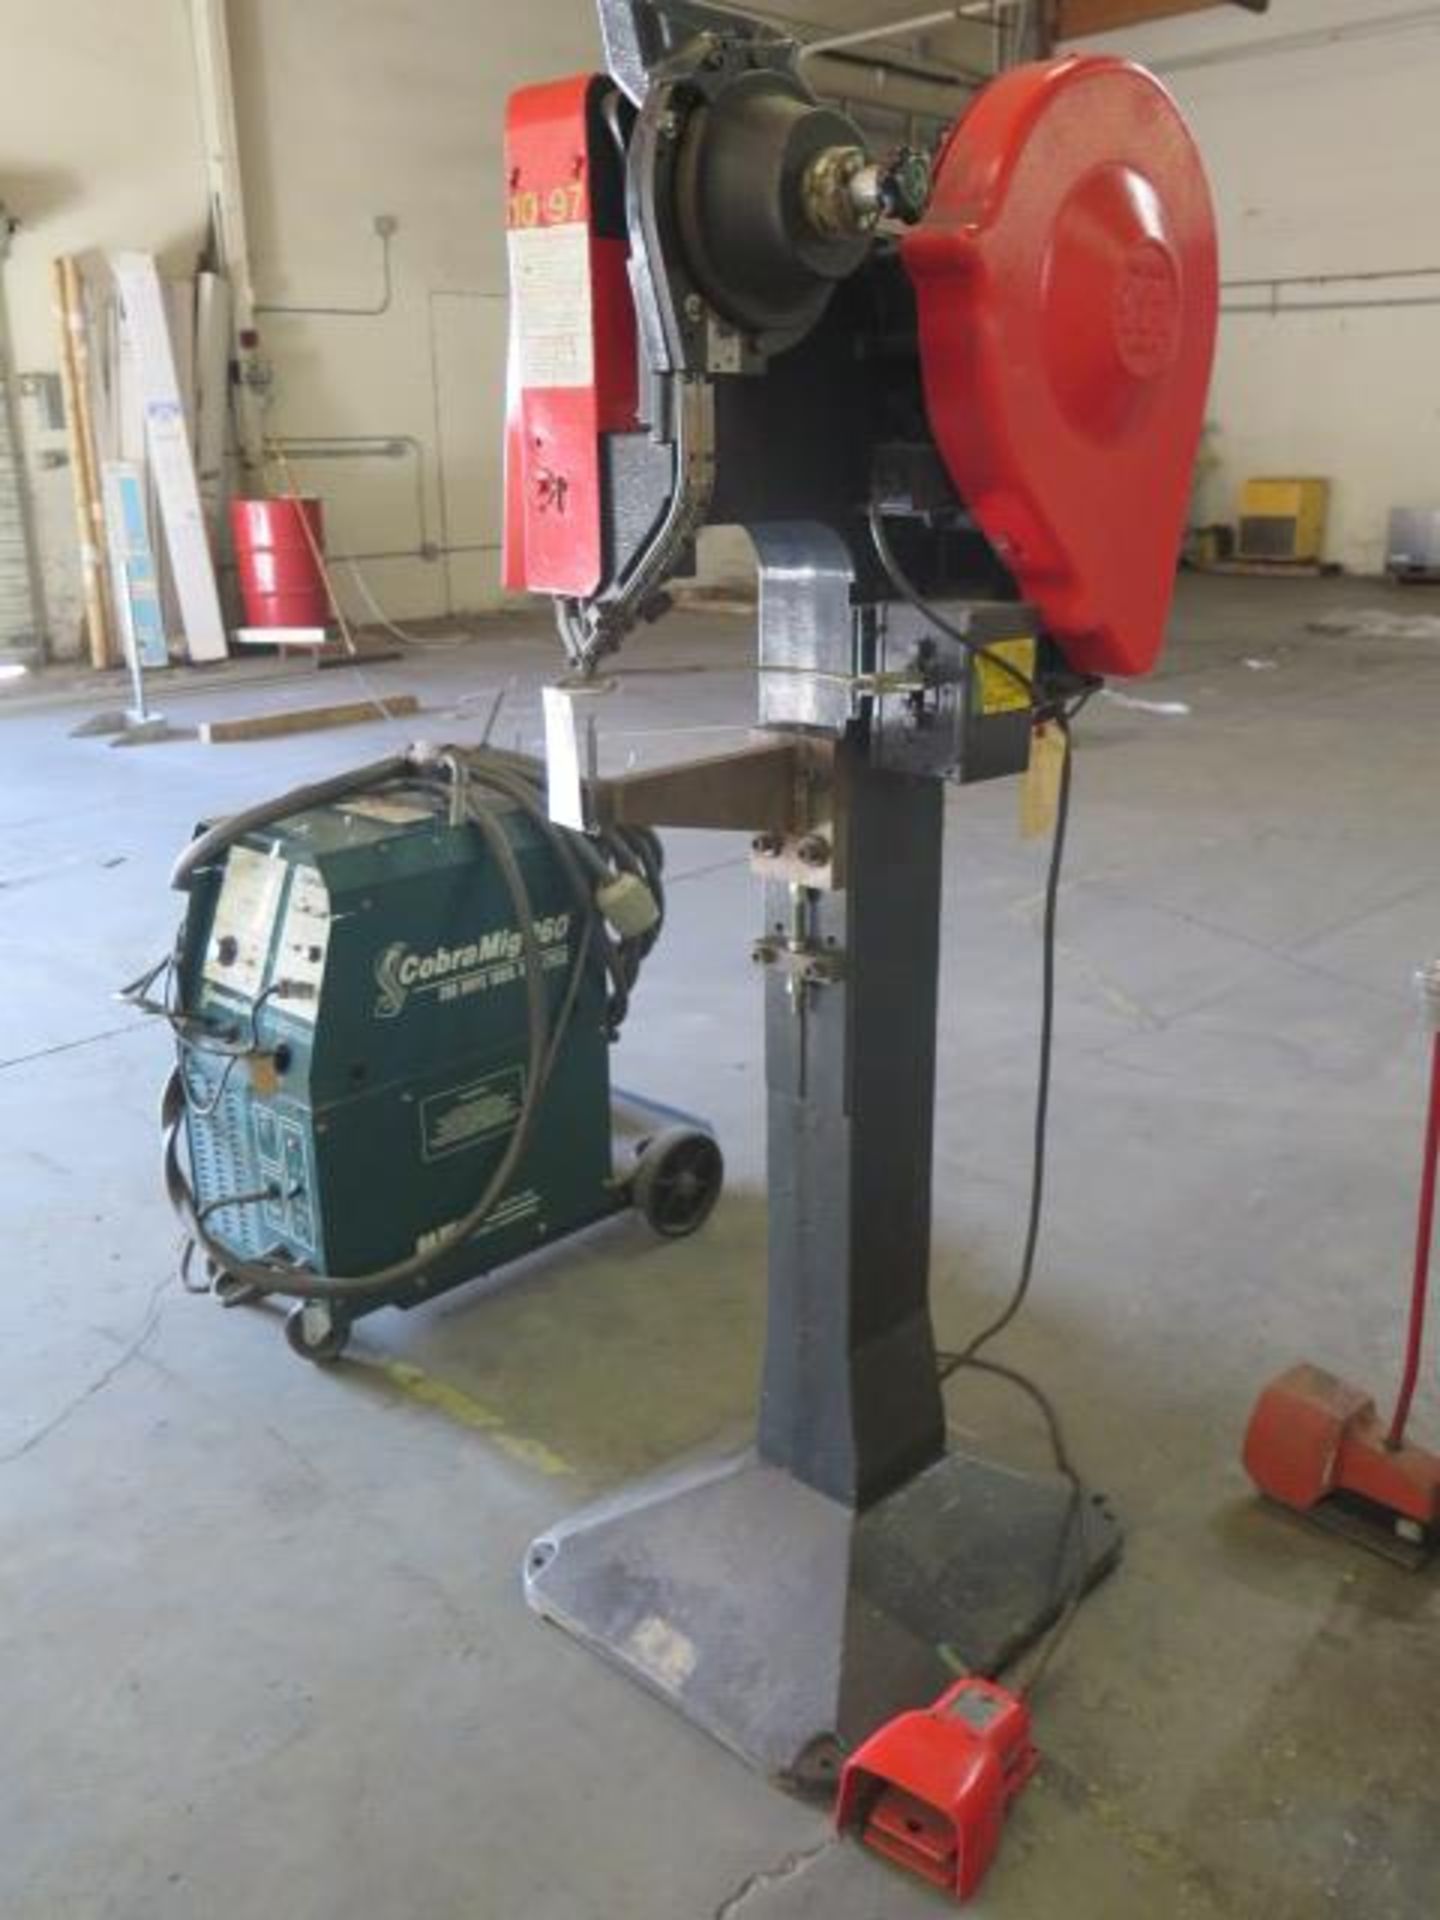 Milford mdl. 256 REV3 Automatic Riveter s/n 1273 w/ Feeder (SOLD AS-IS - NO WARRANTY) - Image 3 of 10